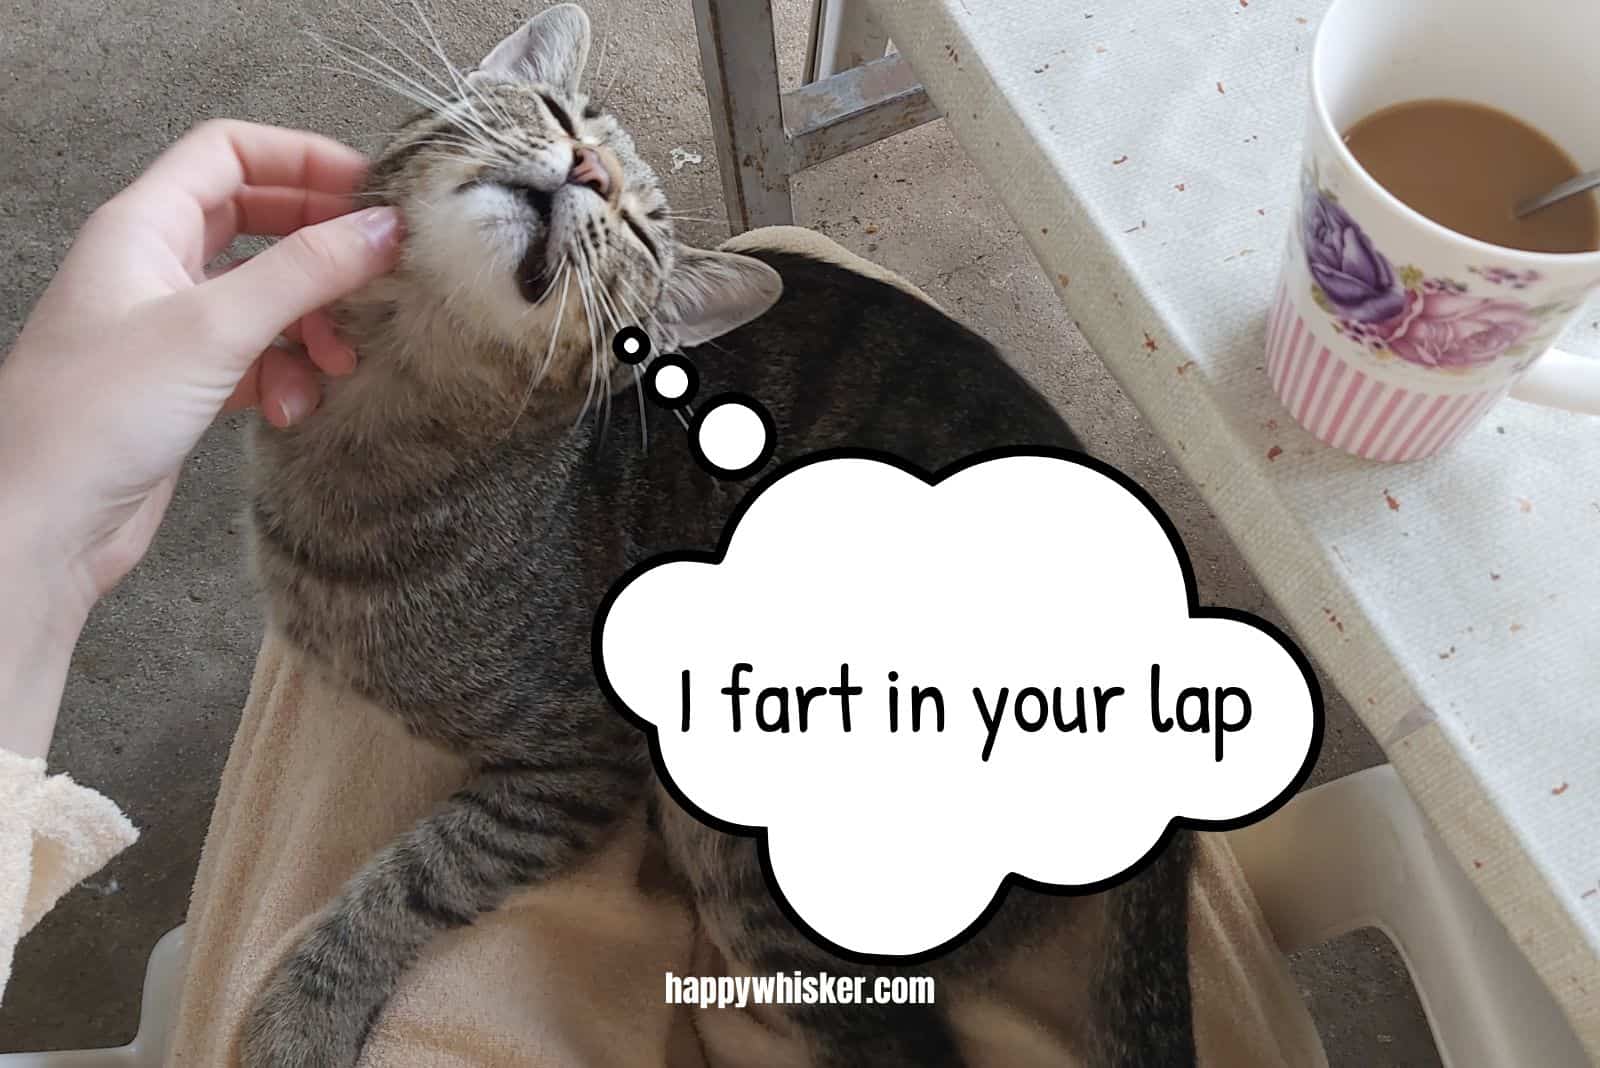 owner petting a cat that farts